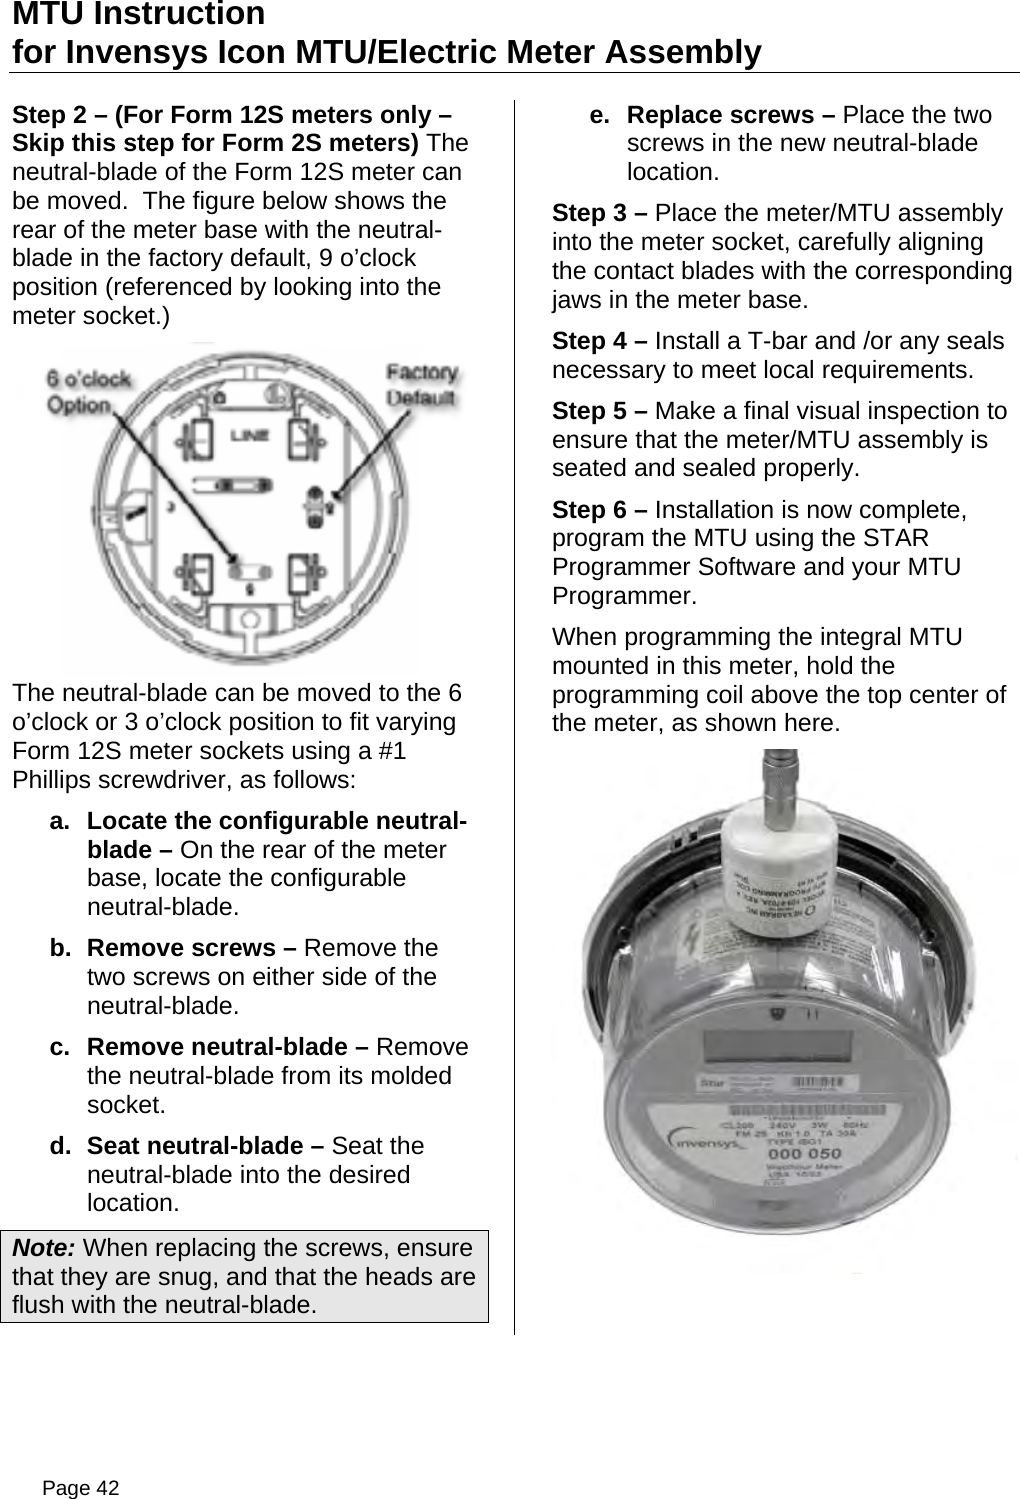 MTU Instruction for Invensys Icon MTU/Electric Meter Assembly Step 2 – (For Form 12S meters only – Skip this step for Form 2S meters) The neutral-blade of the Form 12S meter can be moved.  The figure below shows the rear of the meter base with the neutral-blade in the factory default, 9 o’clock position (referenced by looking into the meter socket.) The neutral-blade can be moved to the 6 o’clock or 3 o’clock position to fit varying Form 12S meter sockets using a #1 Phillips screwdriver, as follows: a.  Locate the configurable neutral-blade – On the rear of the meter base, locate the configurable neutral-blade. b.  Remove screws – Remove the two screws on either side of the neutral-blade. c.  Remove neutral-blade – Remove the neutral-blade from its molded socket. d.  Seat neutral-blade – Seat the neutral-blade into the desired location. Note: When replacing the screws, ensure that they are snug, and that the heads are flush with the neutral-blade. e.  Replace screws – Place the two screws in the new neutral-blade location. Step 3 – Place the meter/MTU assembly into the meter socket, carefully aligning the contact blades with the corresponding jaws in the meter base. Step 4 – Install a T-bar and /or any seals necessary to meet local requirements. Step 5 – Make a final visual inspection to ensure that the meter/MTU assembly is seated and sealed properly. Step 6 – Installation is now complete, program the MTU using the STAR Programmer Software and your MTU Programmer. When programming the integral MTU mounted in this meter, hold the programming coil above the top center of the meter, as shown here.  Page 42